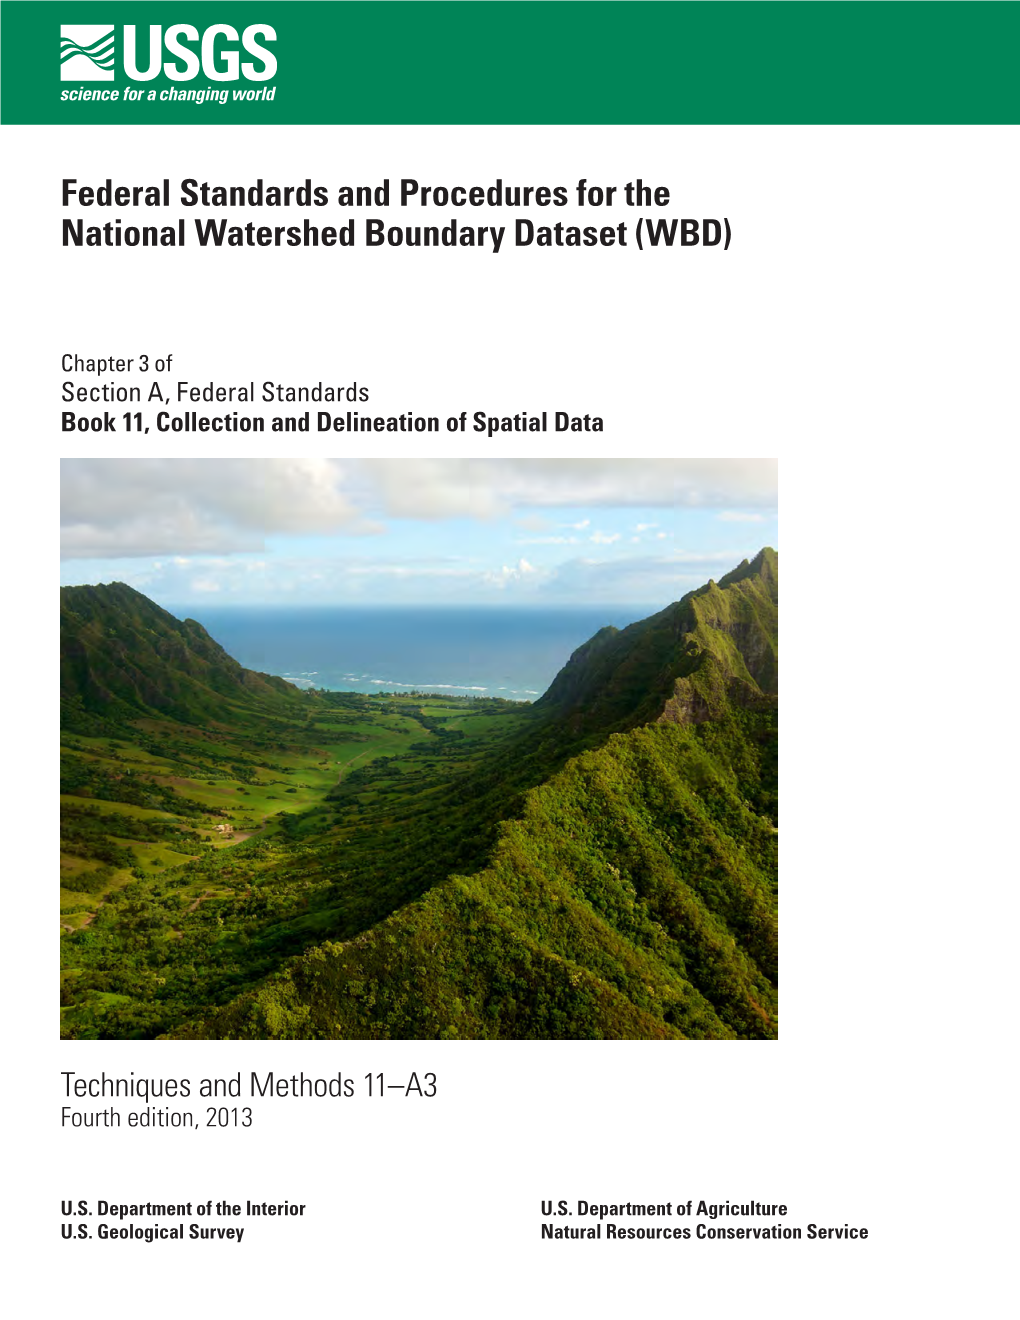 Federal Standards and Procedures for the National Watershed Boundary Dataset (WBD)